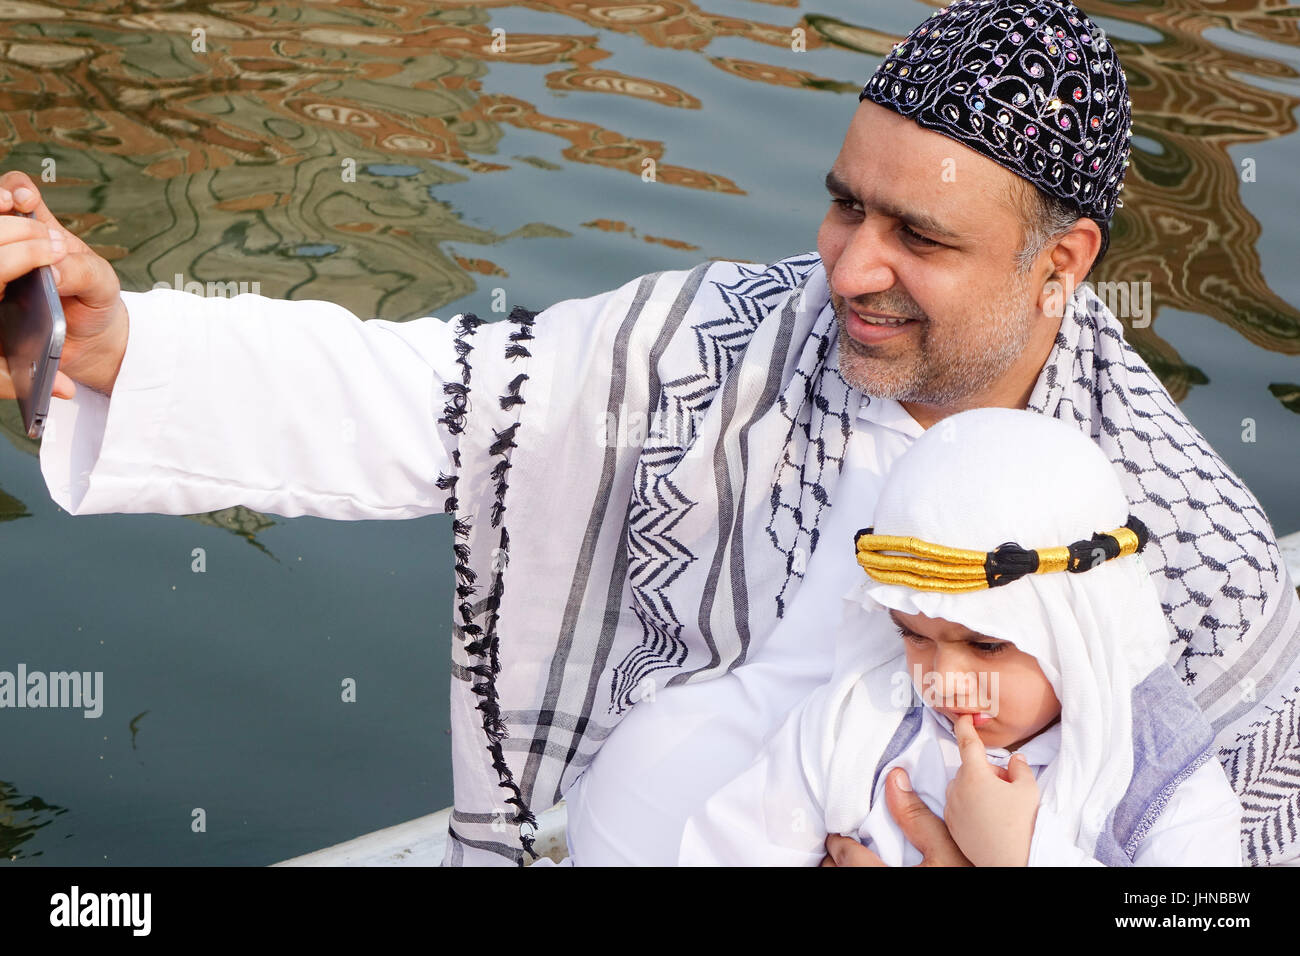 A adorable muslim child  dressed well arabian sheik costume or outfit and taking selfie with father celebrating enjoying the occasion of Eid Al Fitr Stock Photo